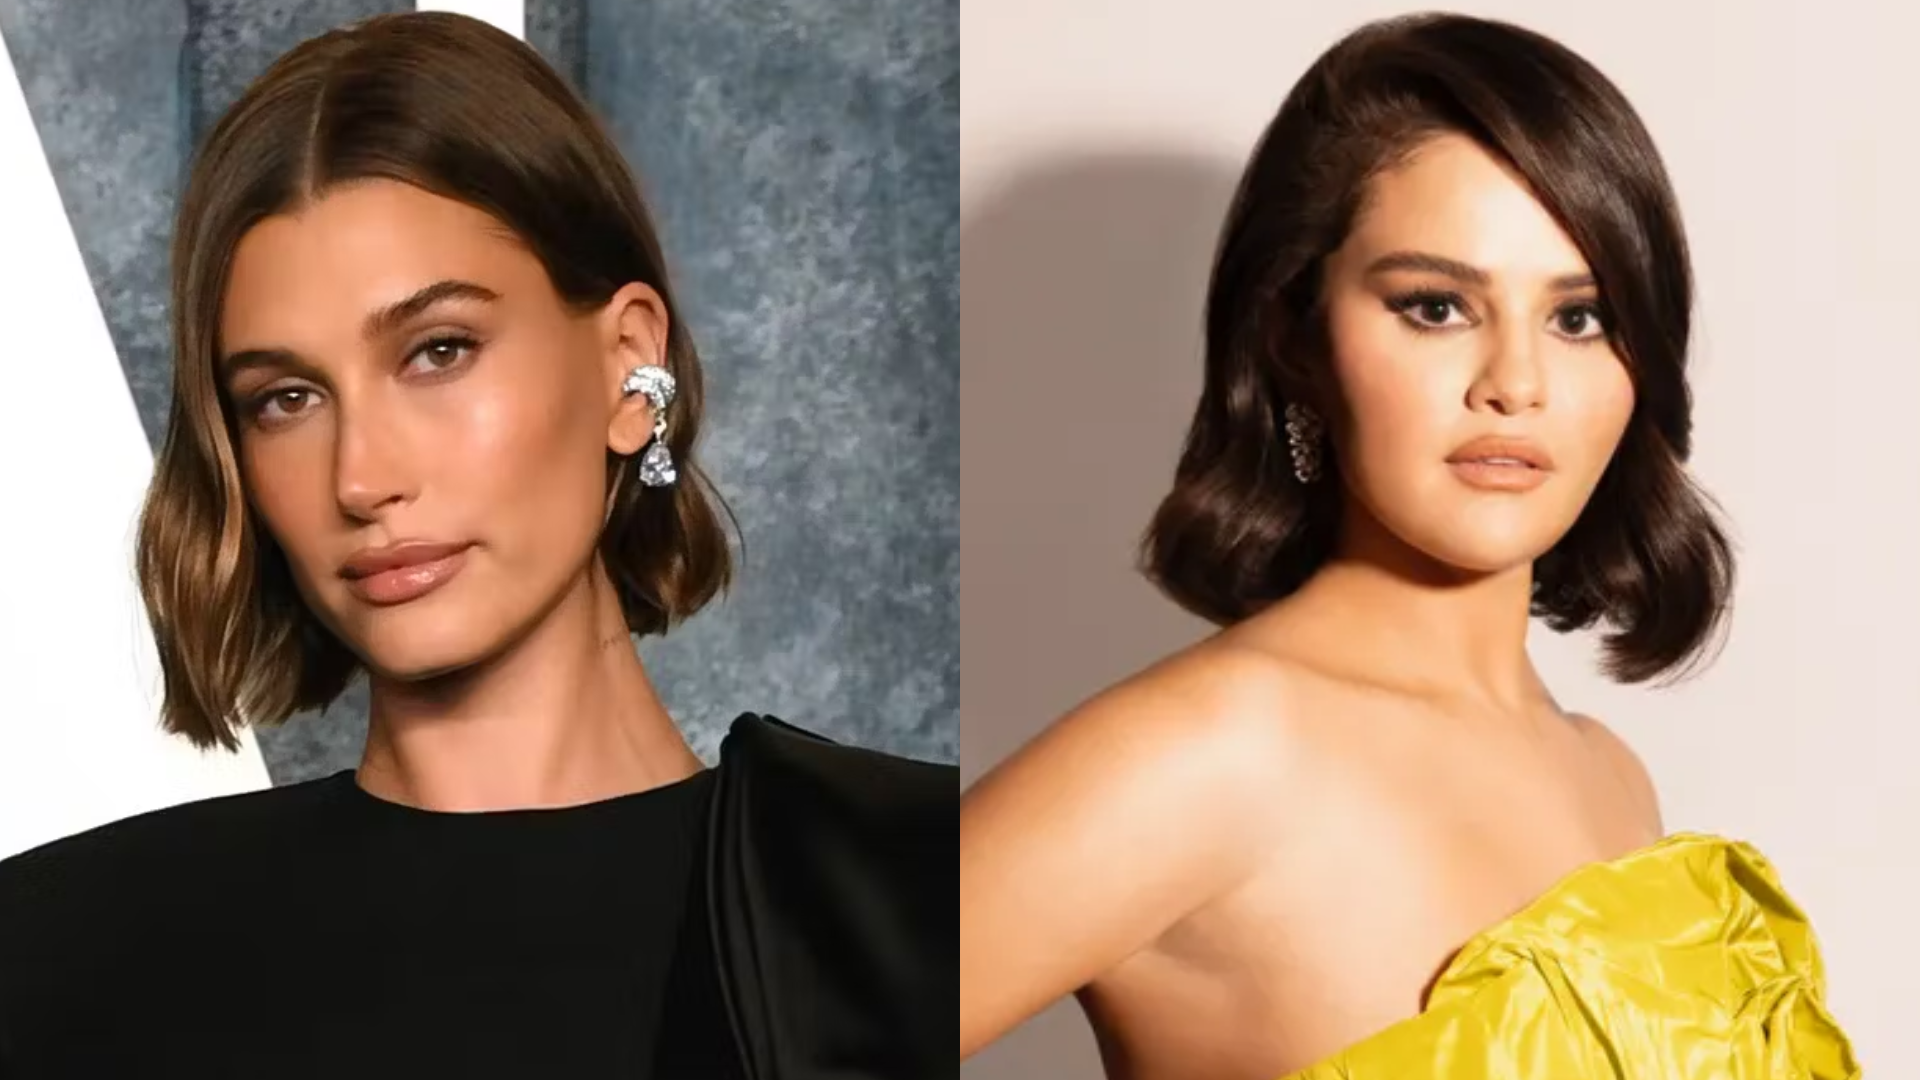 Hailey Bieber Accused Of Reigniting Her Feud With Selena Gomez After She Shares Beyonce’s ‘Jolene’ Cover